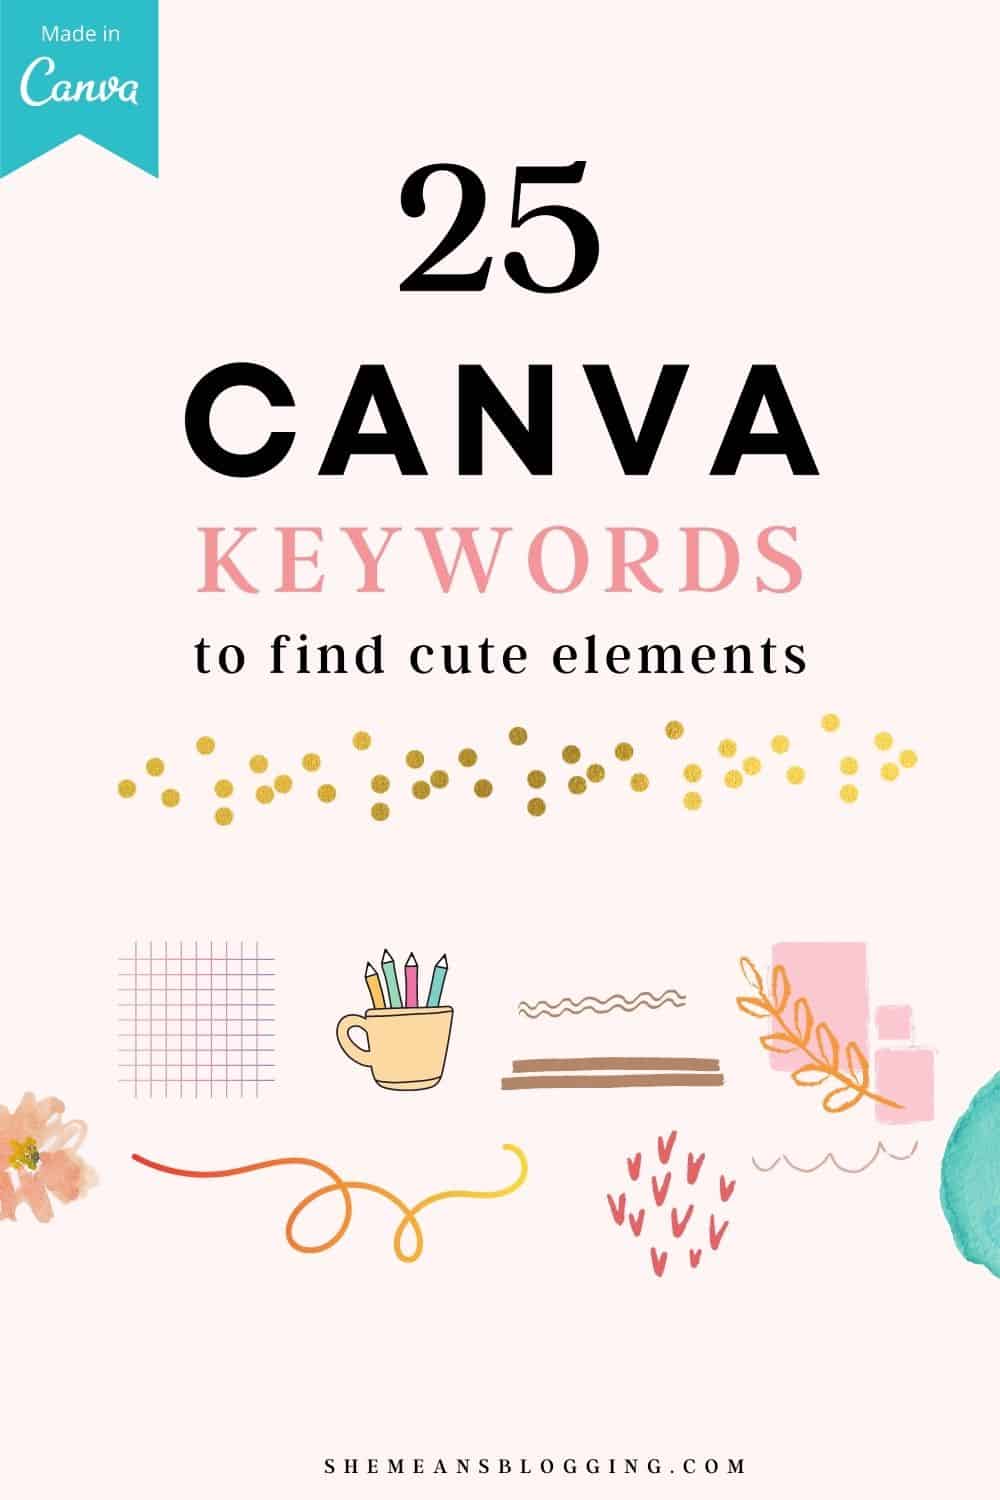 25 Canva Keywords for Elements to Make Creative Designs